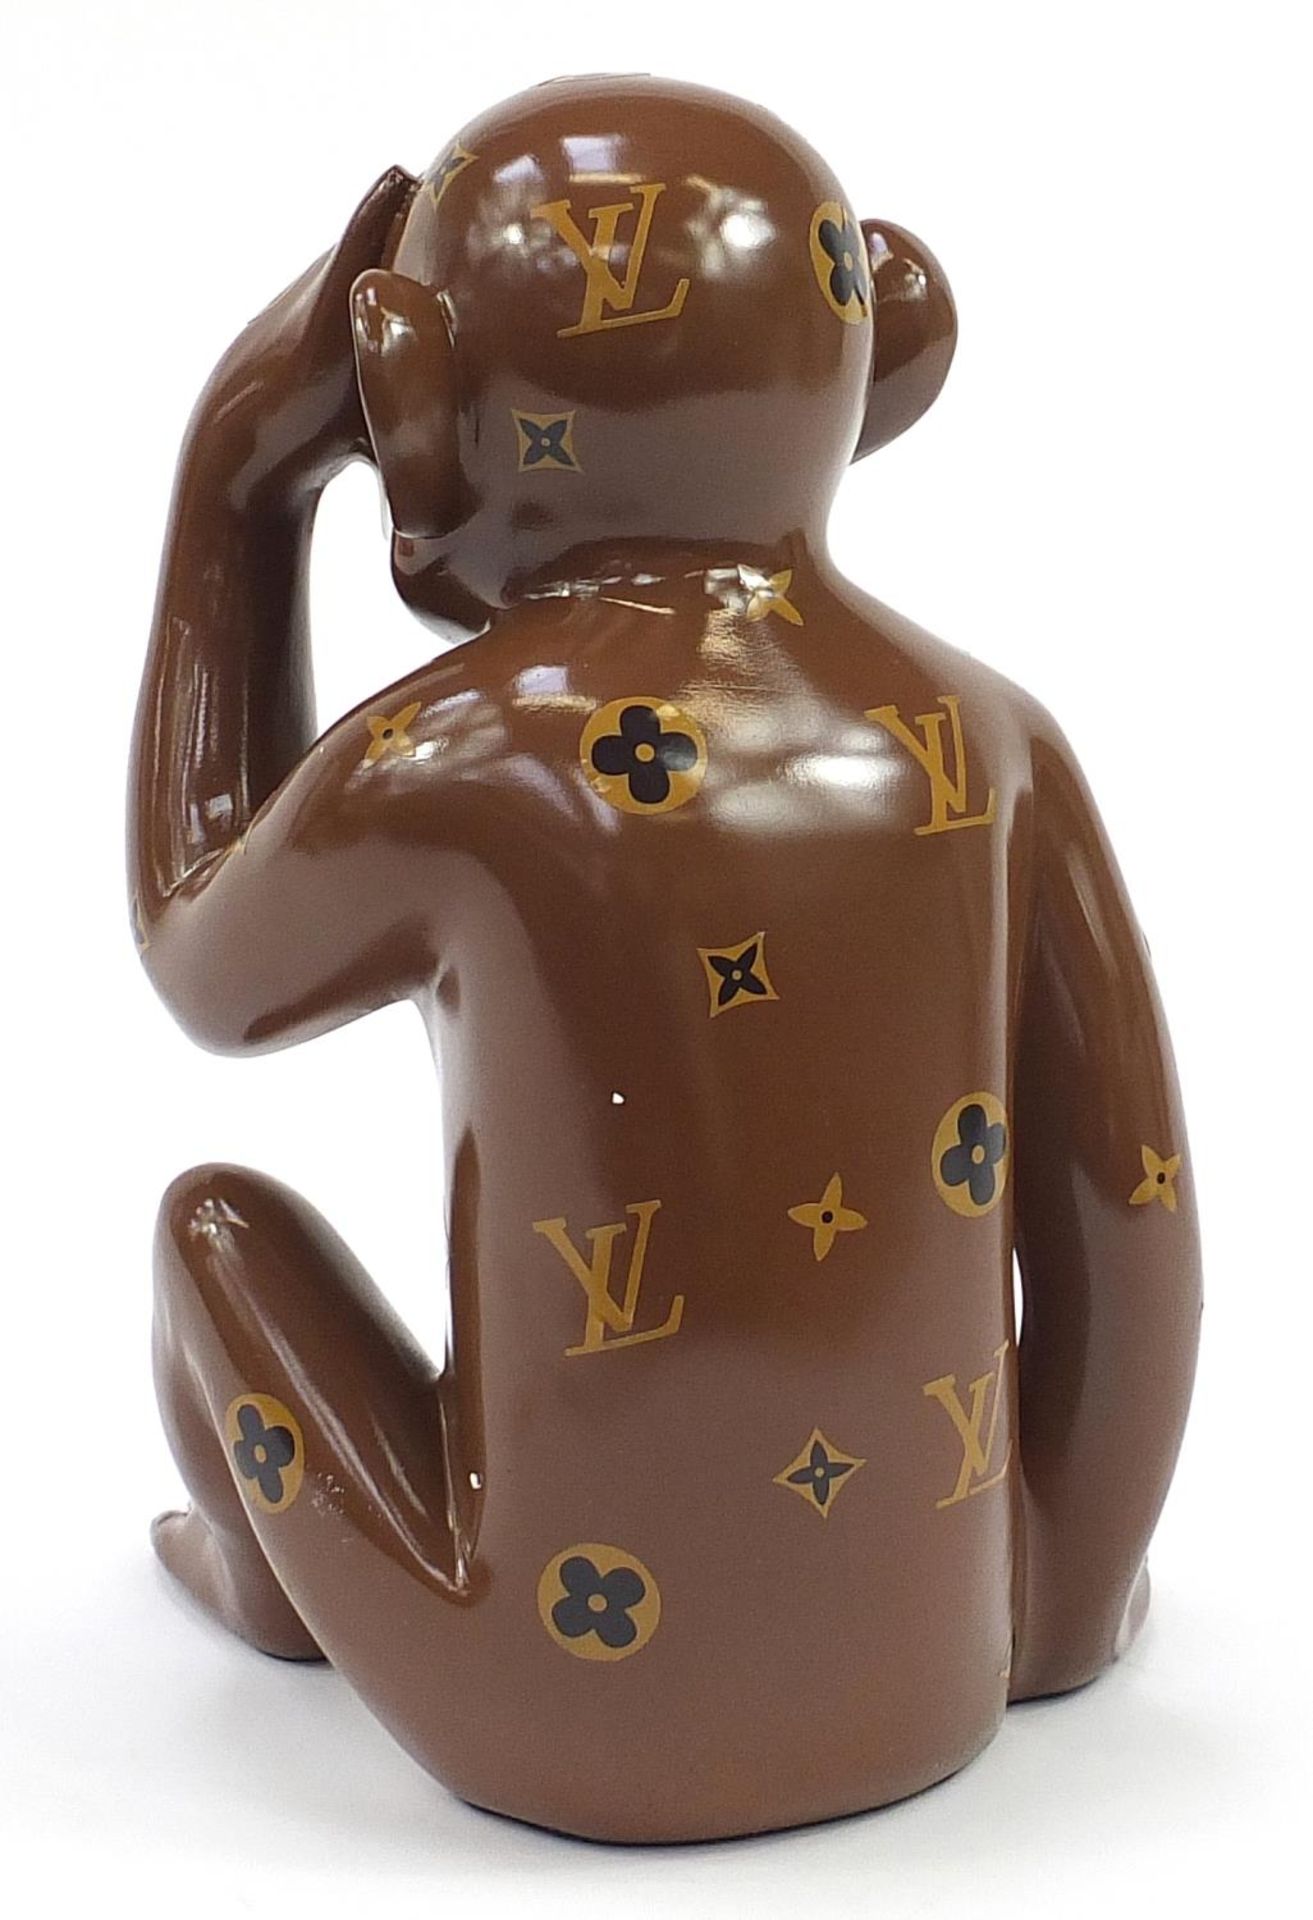 Louis Vuitton style seated chimpanzee, 39cm high - Image 2 of 3